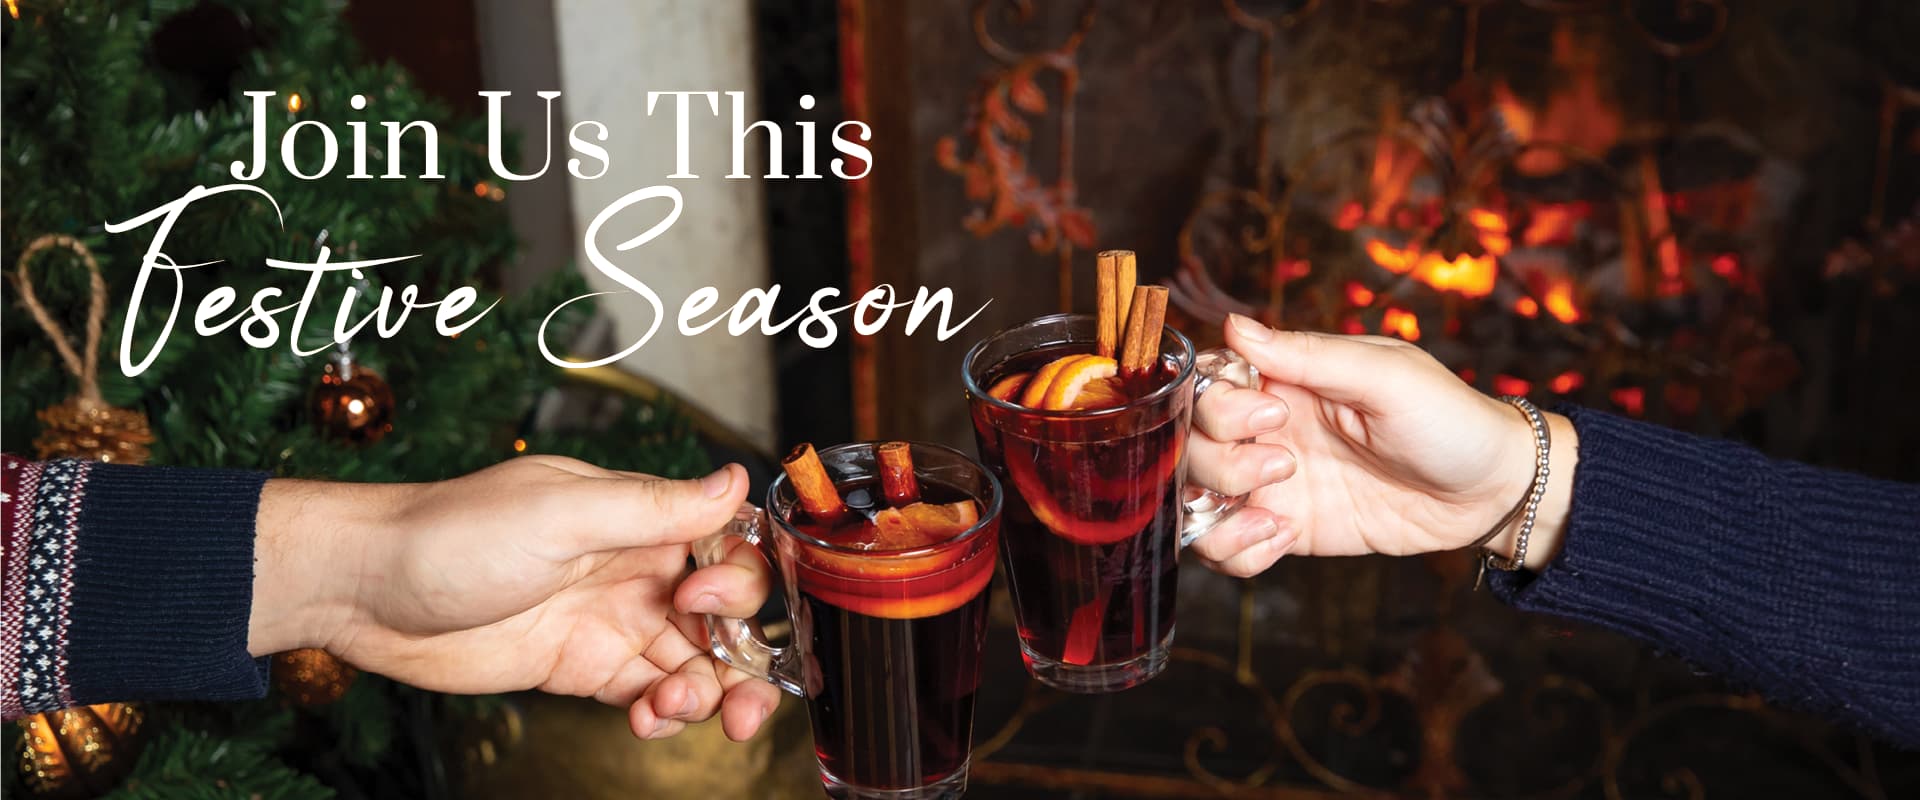 join us this festive season at The New Inn | Mulled Wine